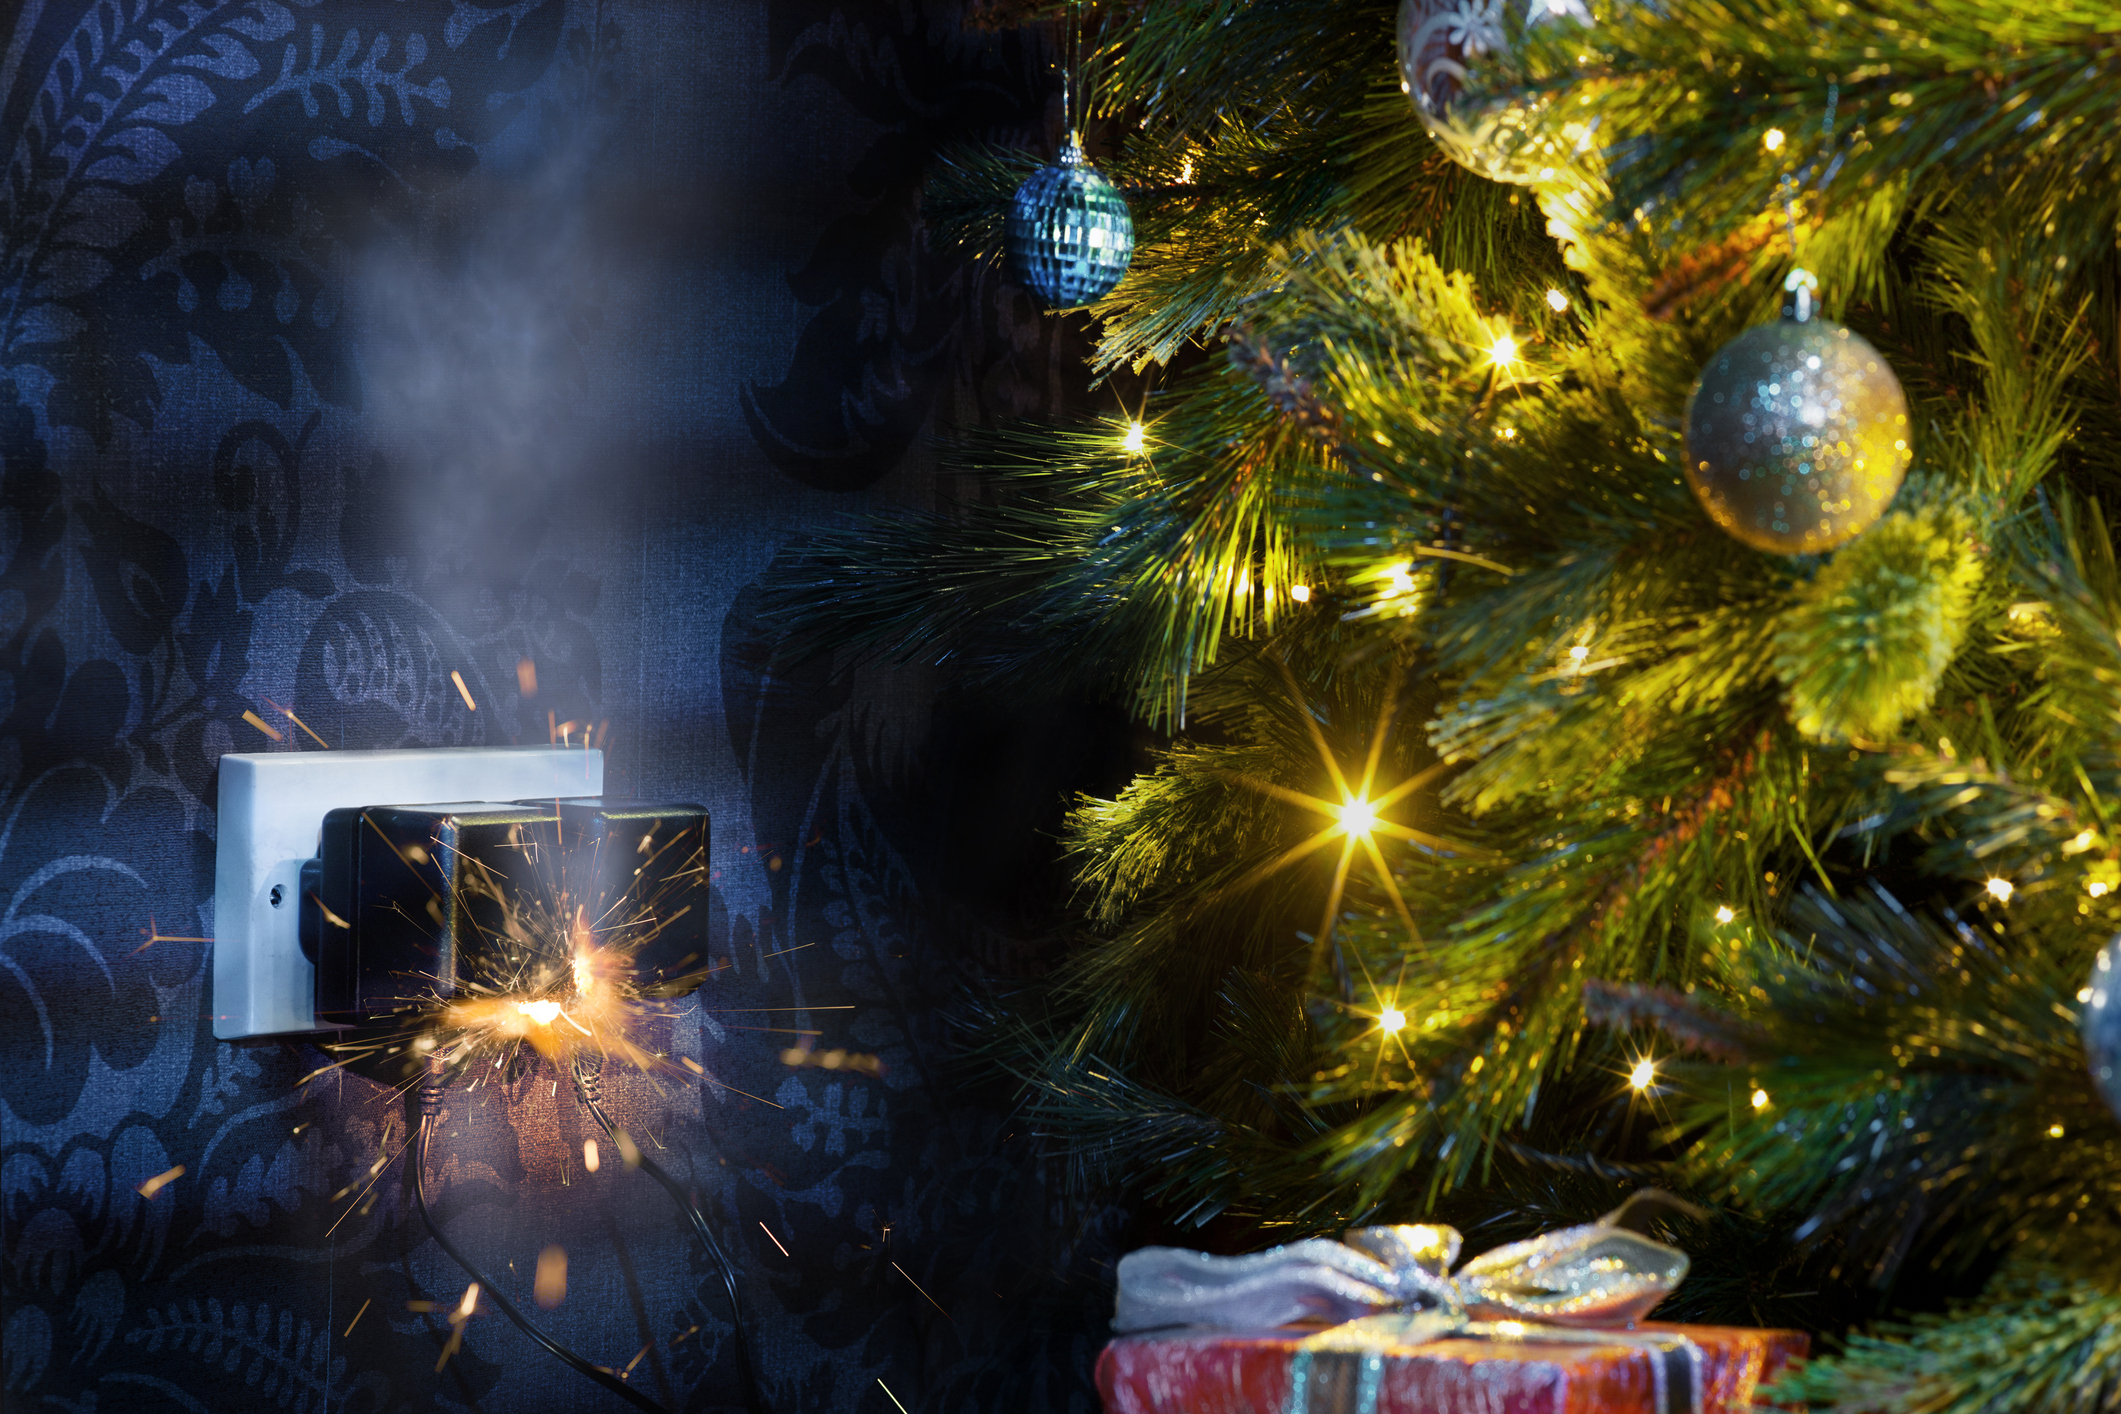 Candles, Evergreens, and Twinkle Lights, Oh My! Prevent Holiday Fire Hazards This Winter.